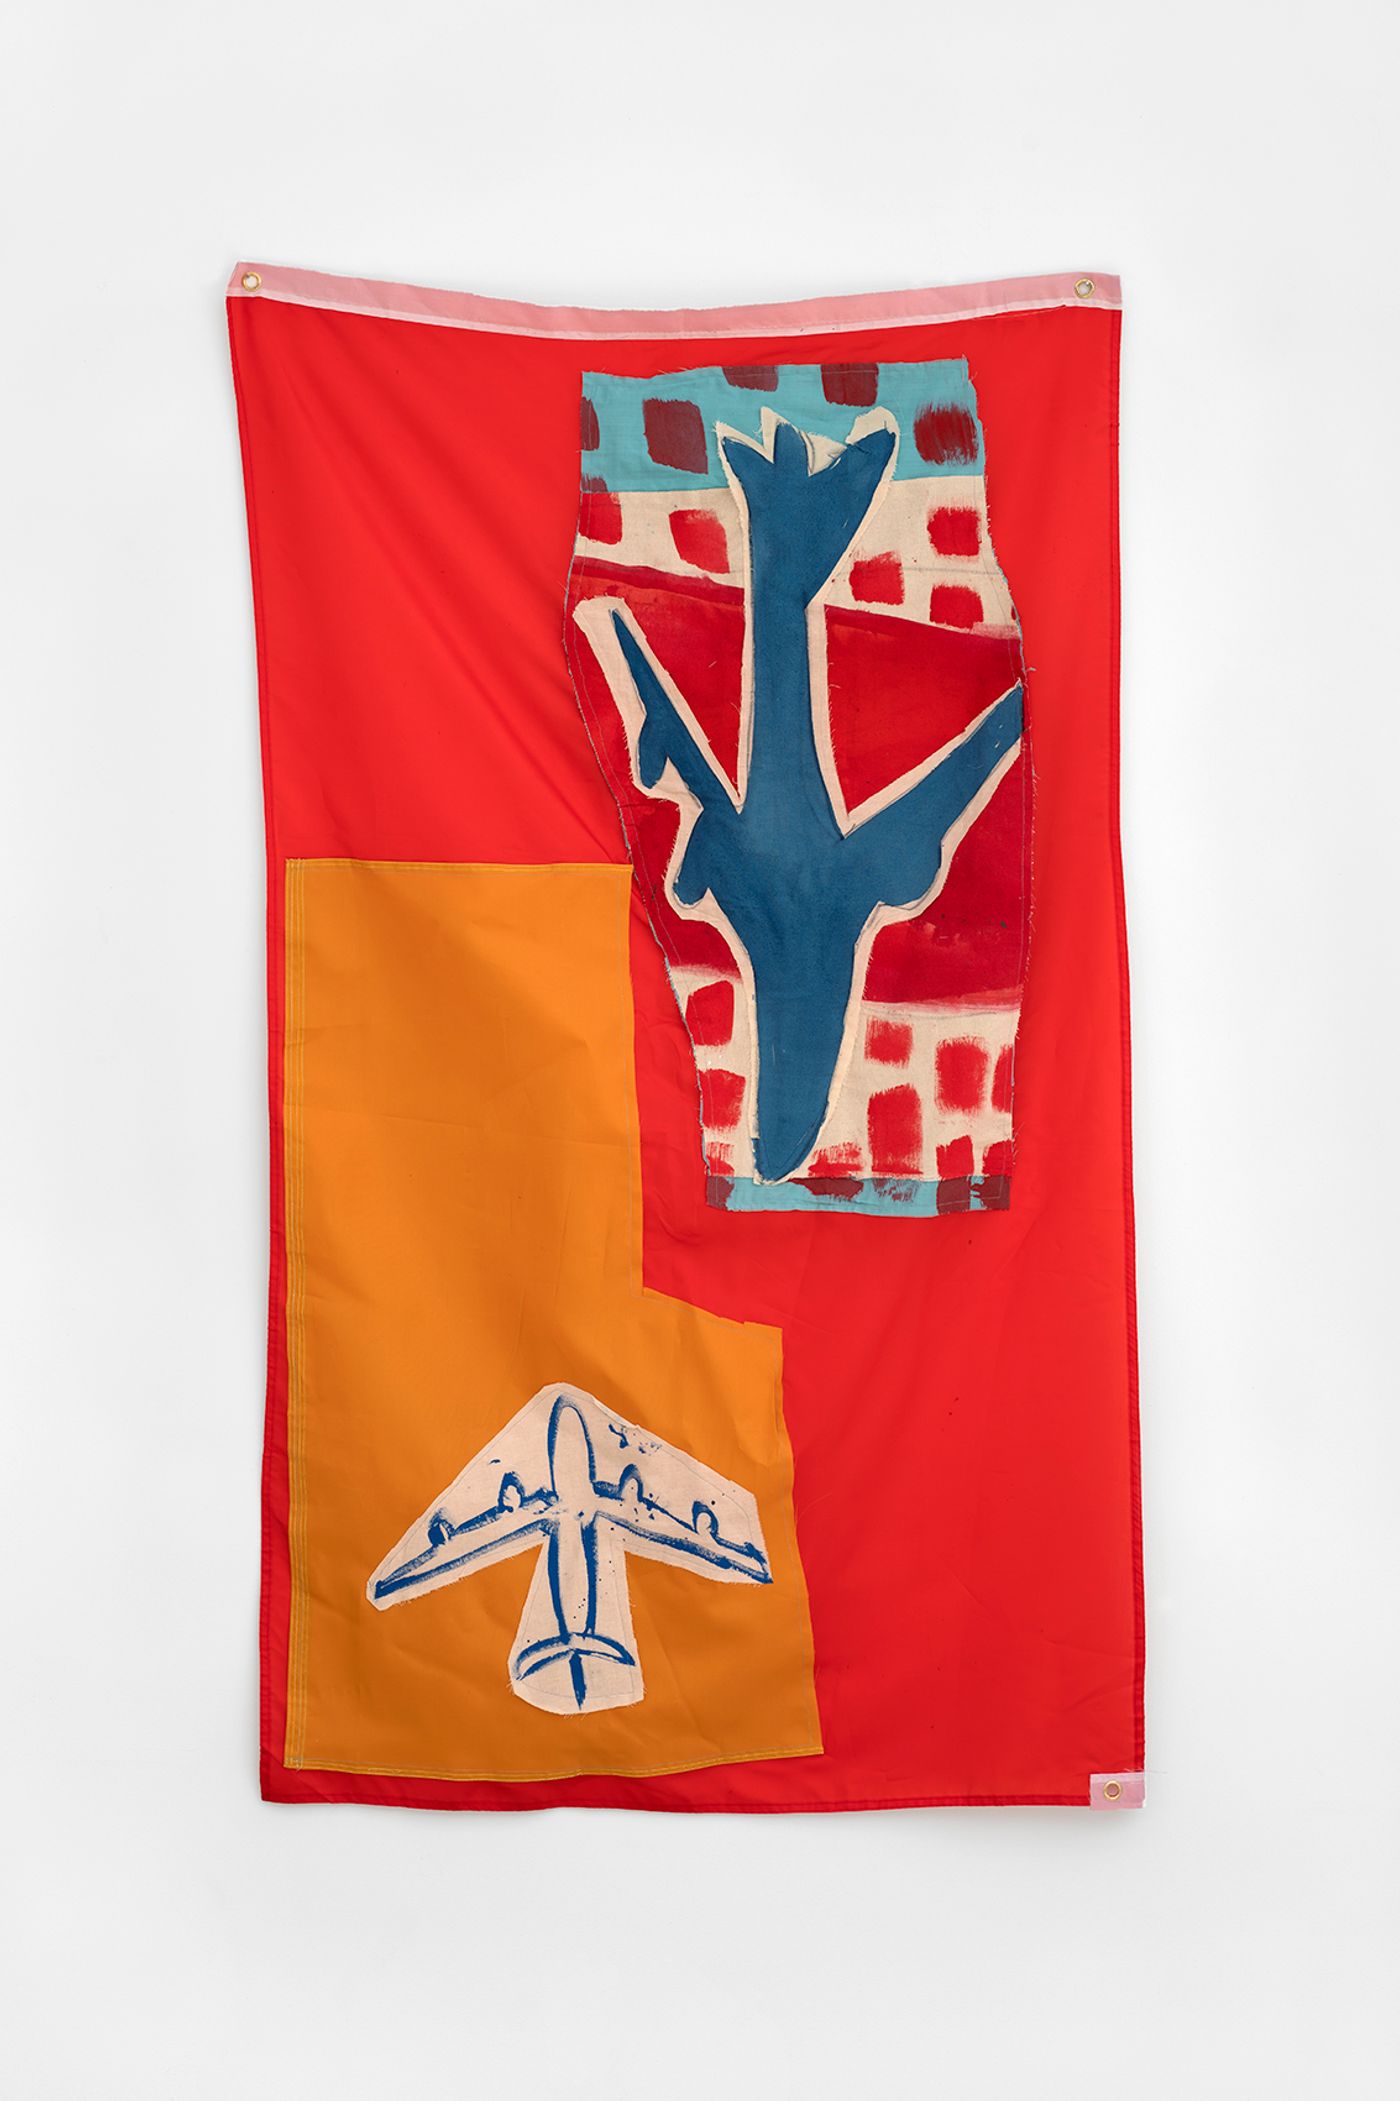 Image of Untitled (Plane), 2020: Fabric and paint on flag